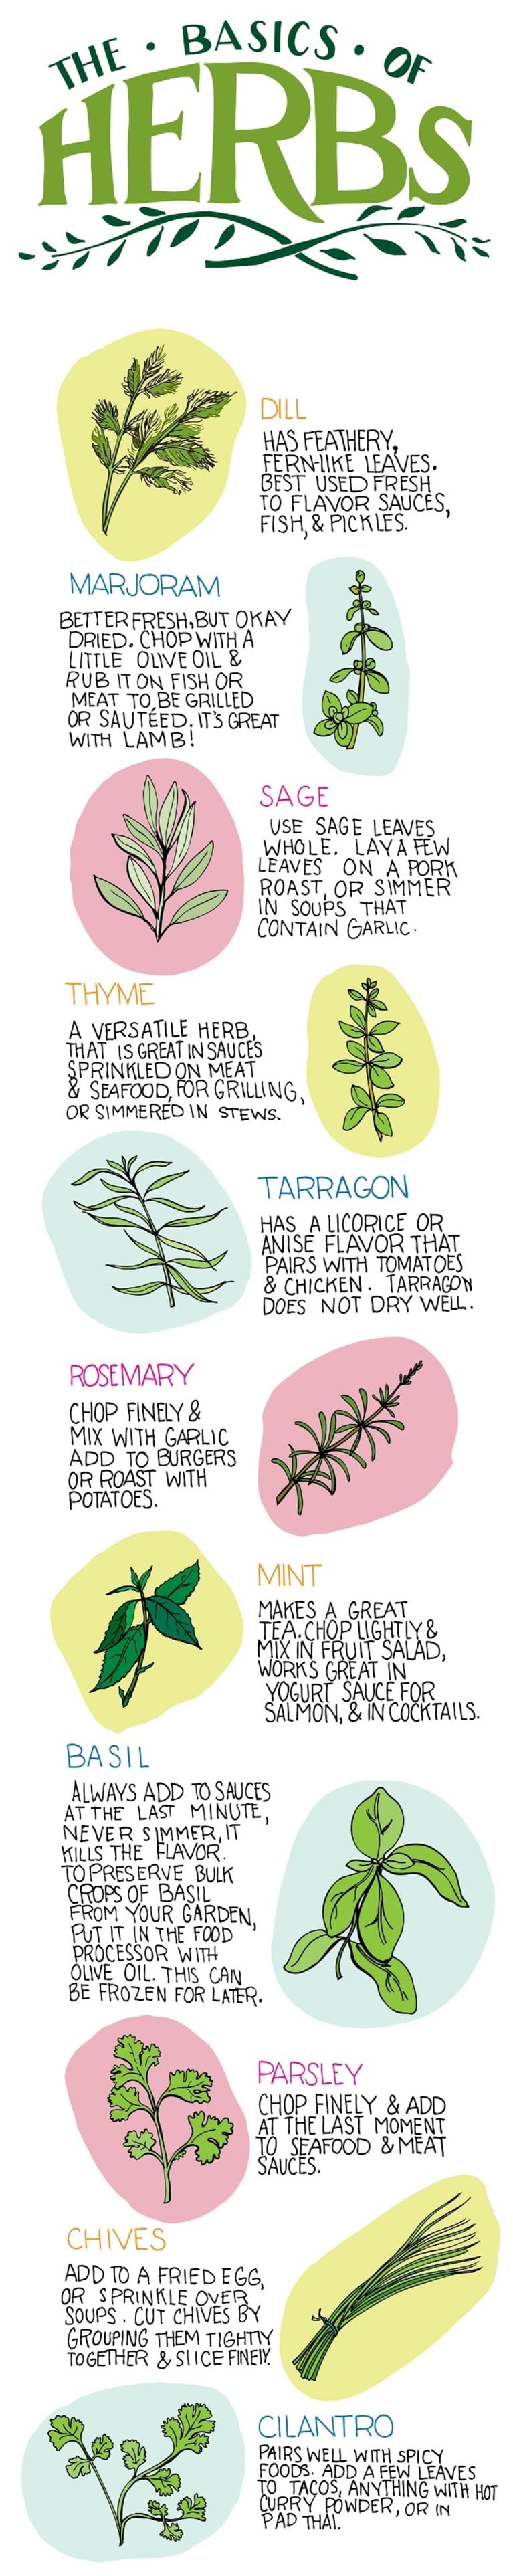 The Basics of Herbs: Cooking Cheat Sheet